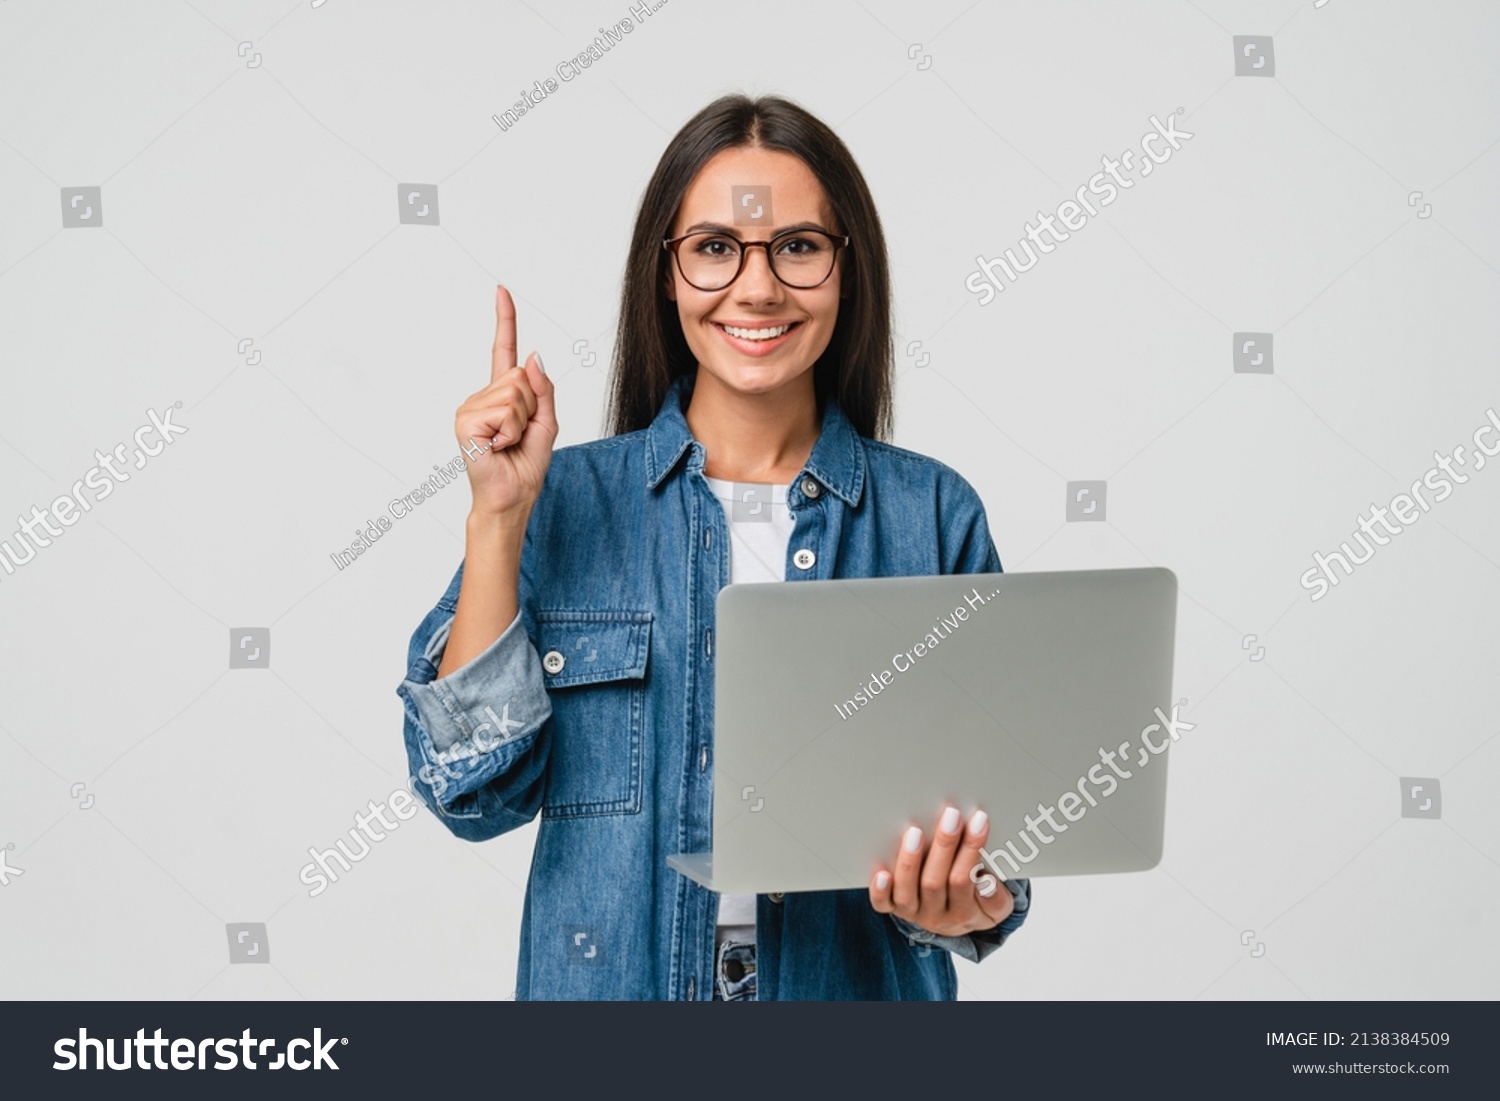 Young smart caucasian student freelancer woman using laptop for remote work, e-learning at university college, e-banking, online shopping, webinars having idea startup isolated in white background #2138384509